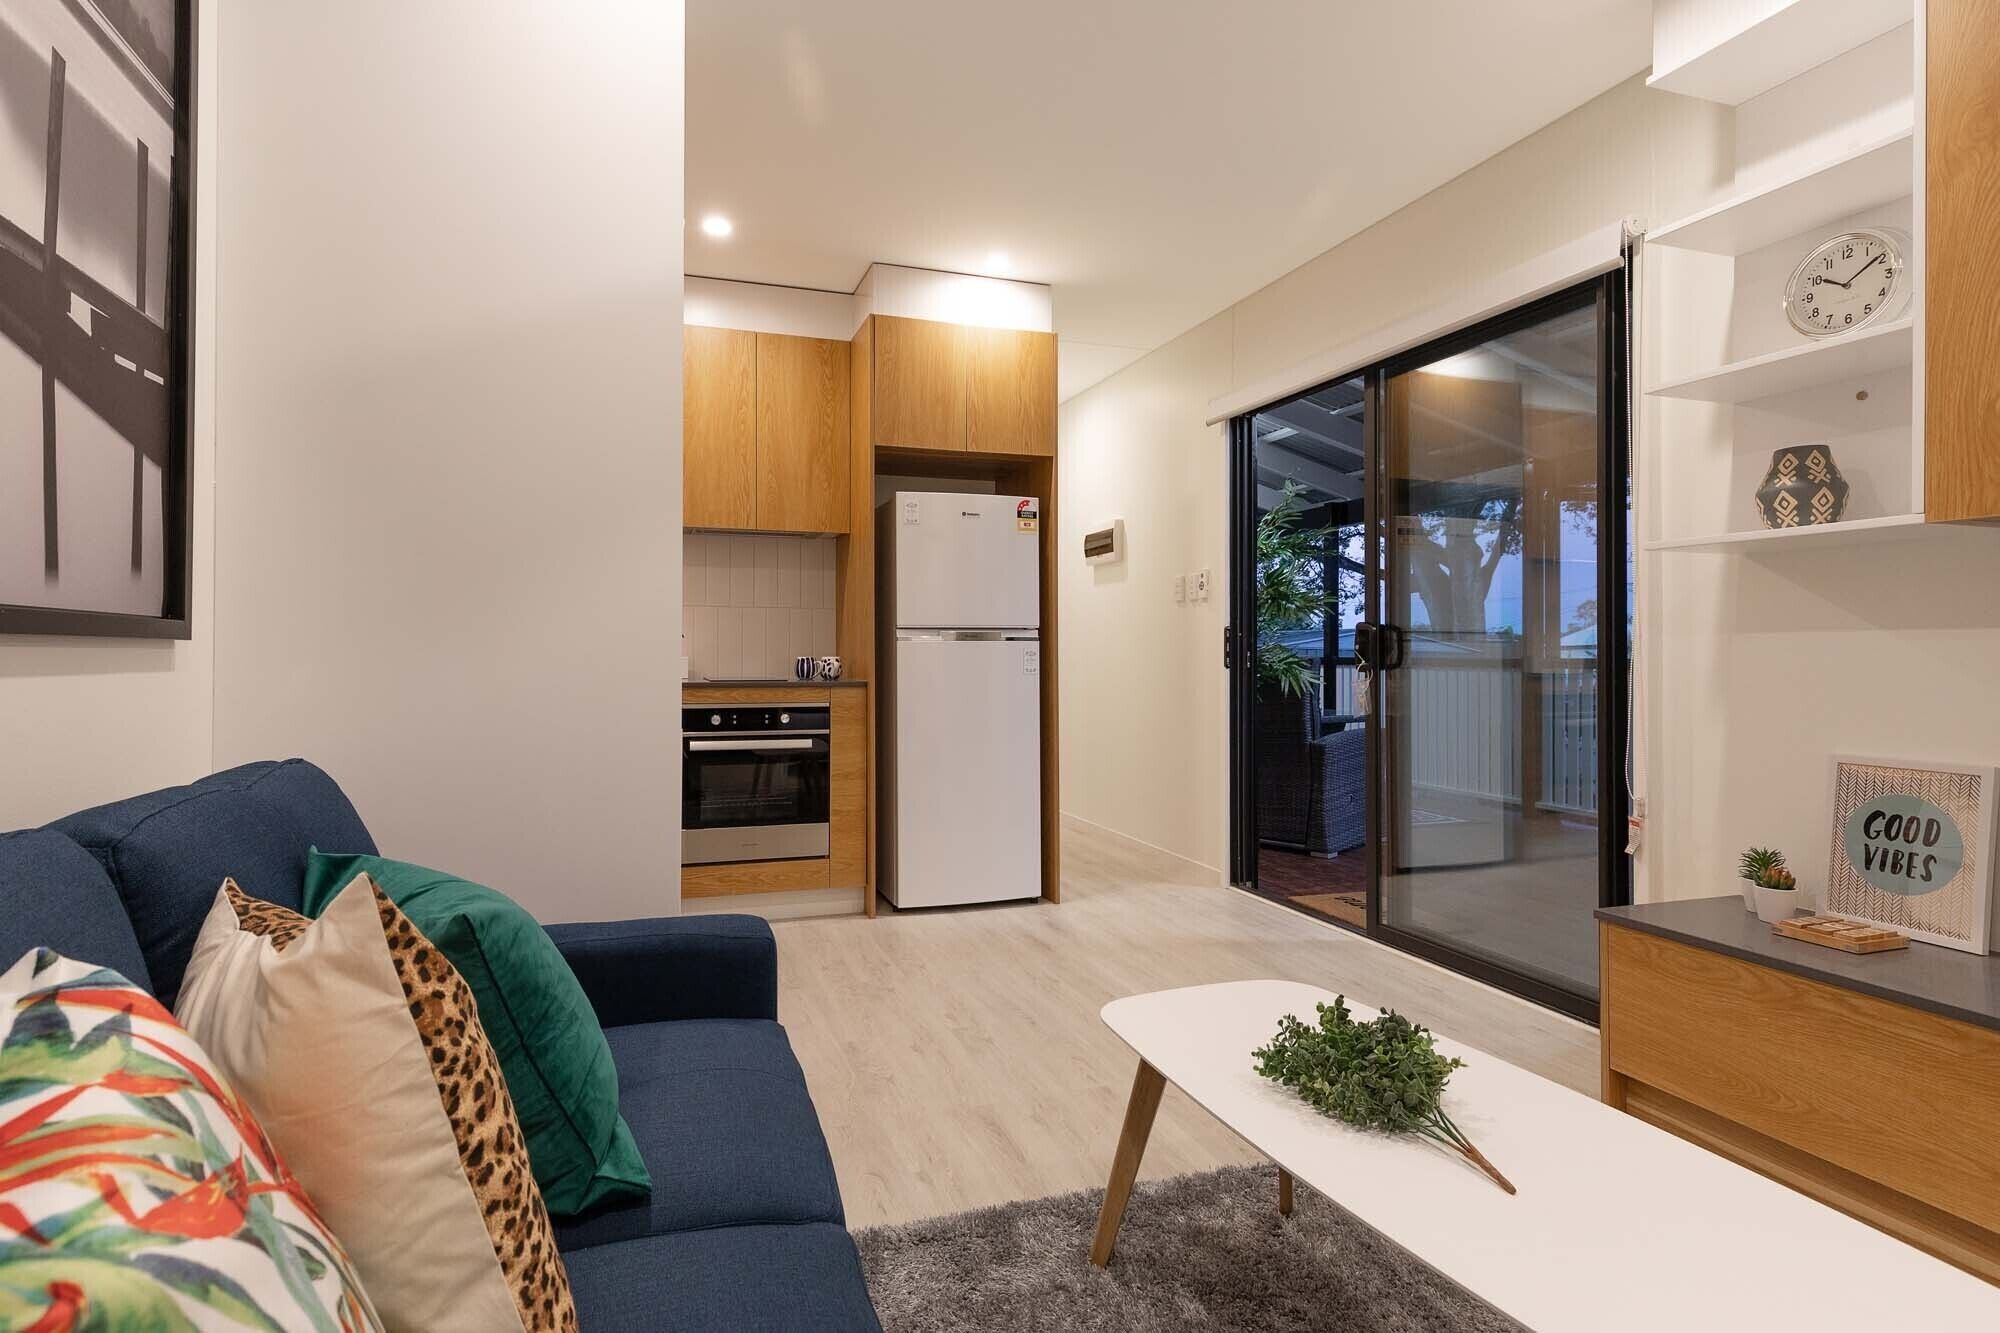 Soak up the Calm of this Creatively Modular Home / Shipping Container